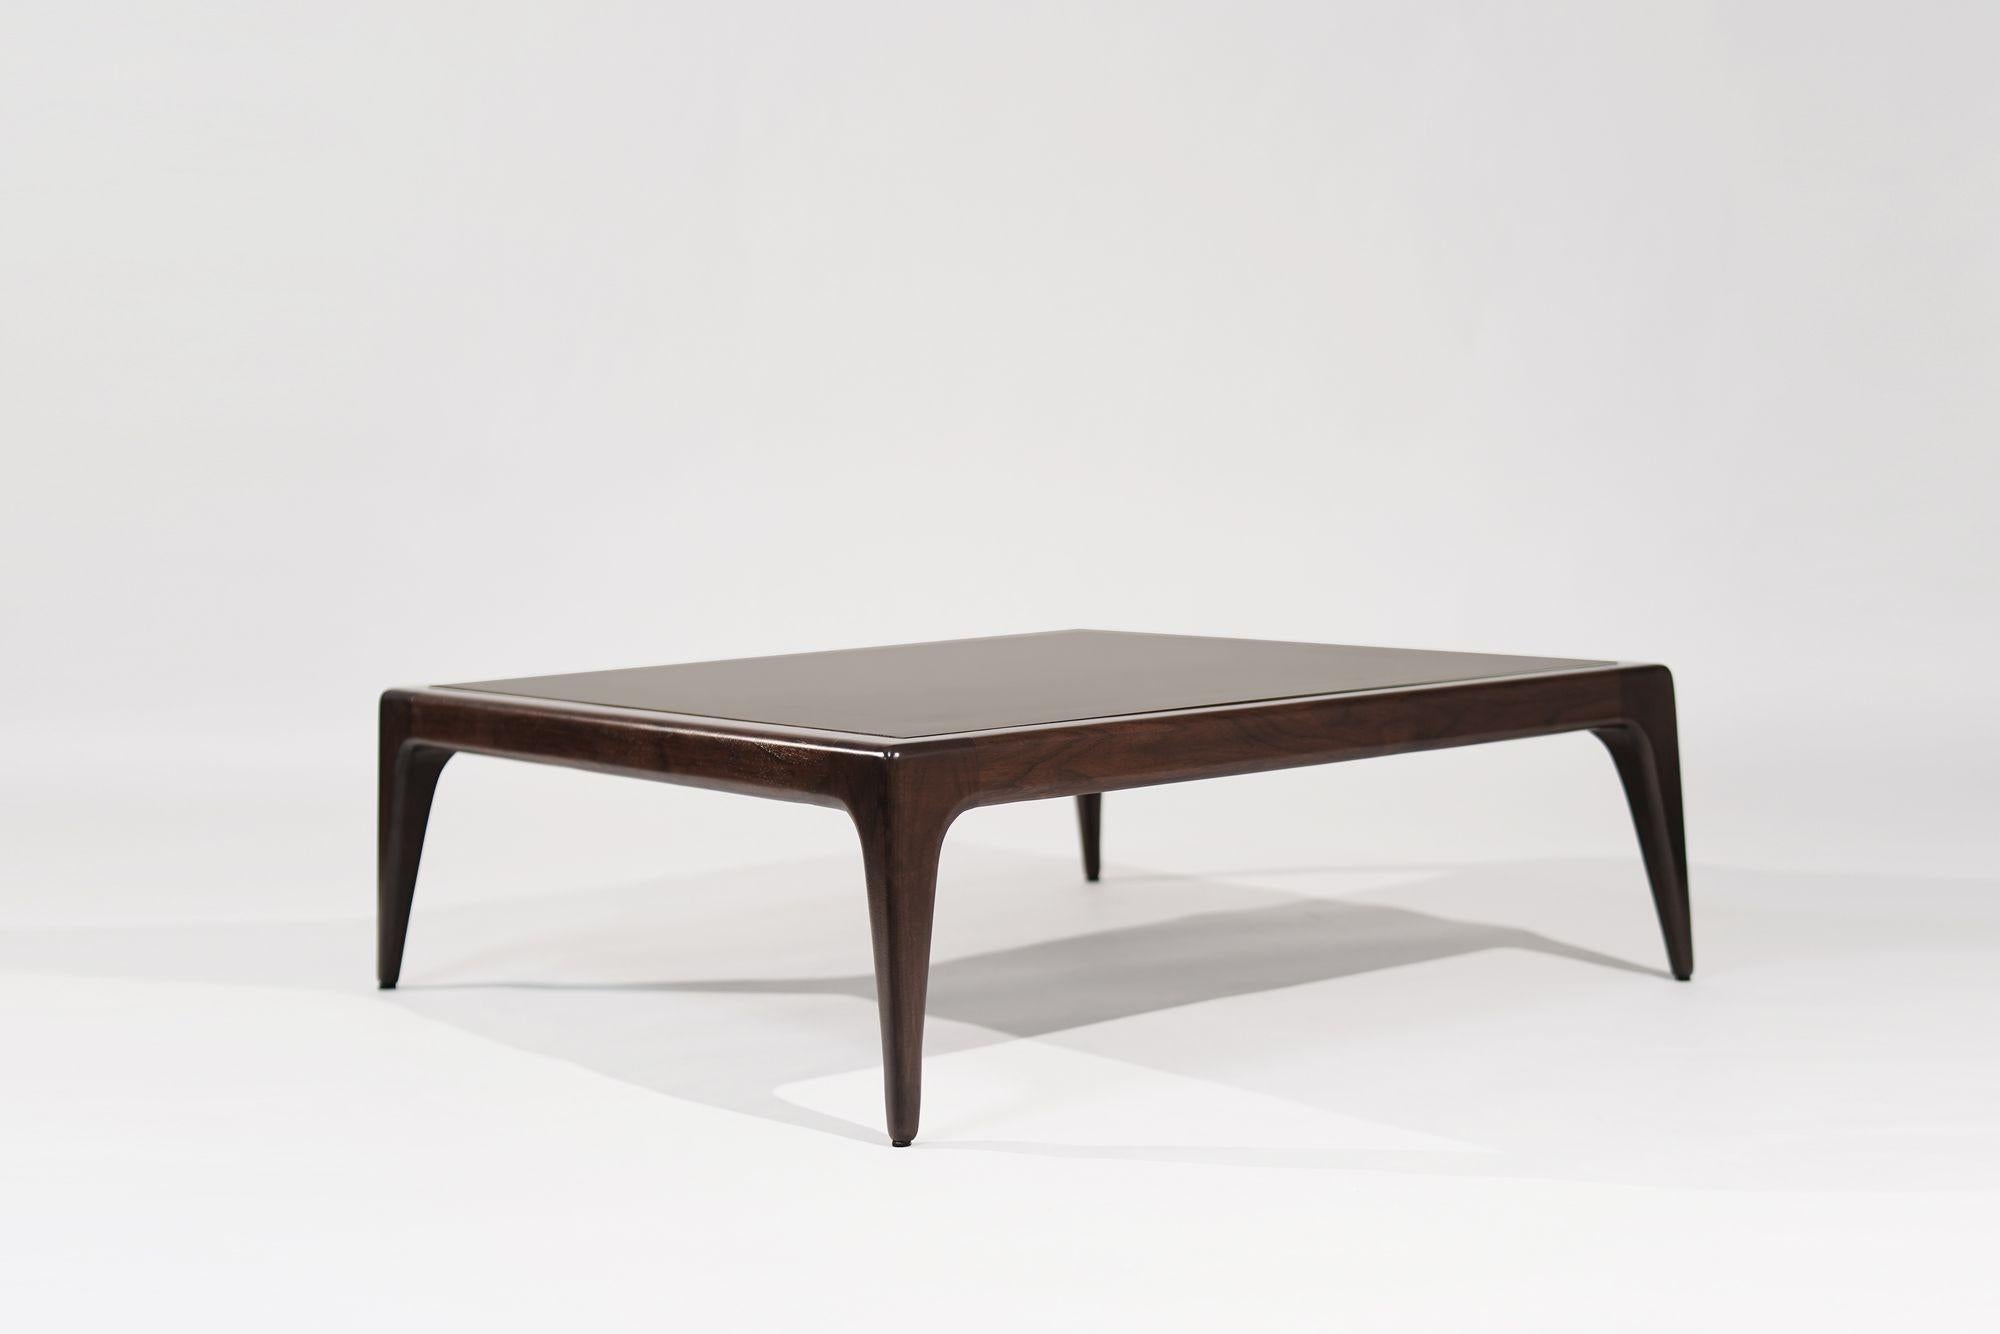 Elevate your living space with our sculptural coffee table, inspired by Vladimir Kagan's iconic style. Featuring a lacquered bronze top, this one-of-a-kind piece exudes luxury and sophistication. Crafted from high-quality materials in a private